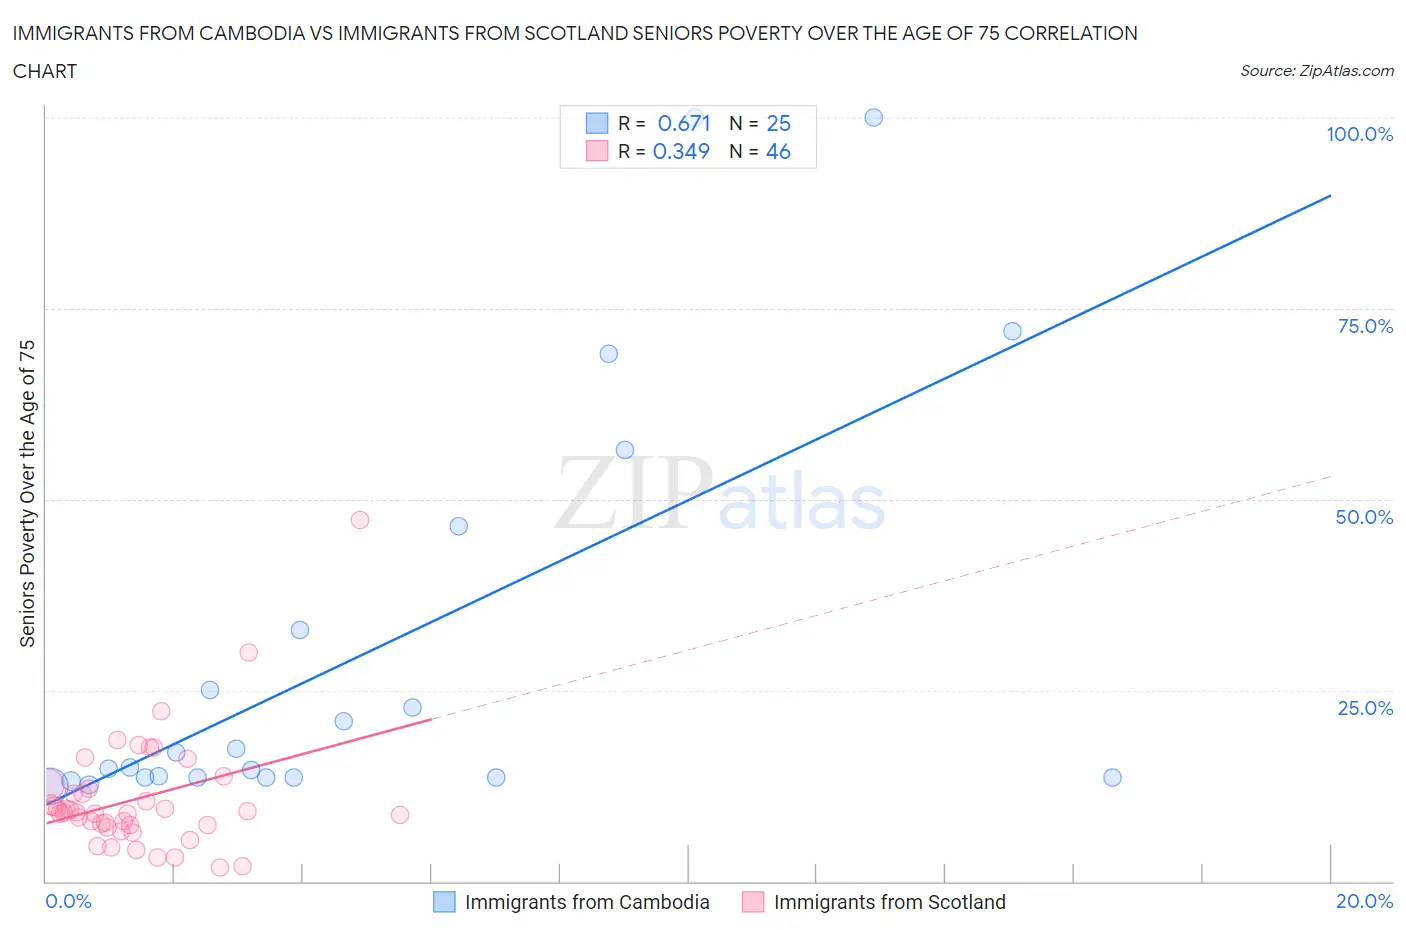 Immigrants from Cambodia vs Immigrants from Scotland Seniors Poverty Over the Age of 75